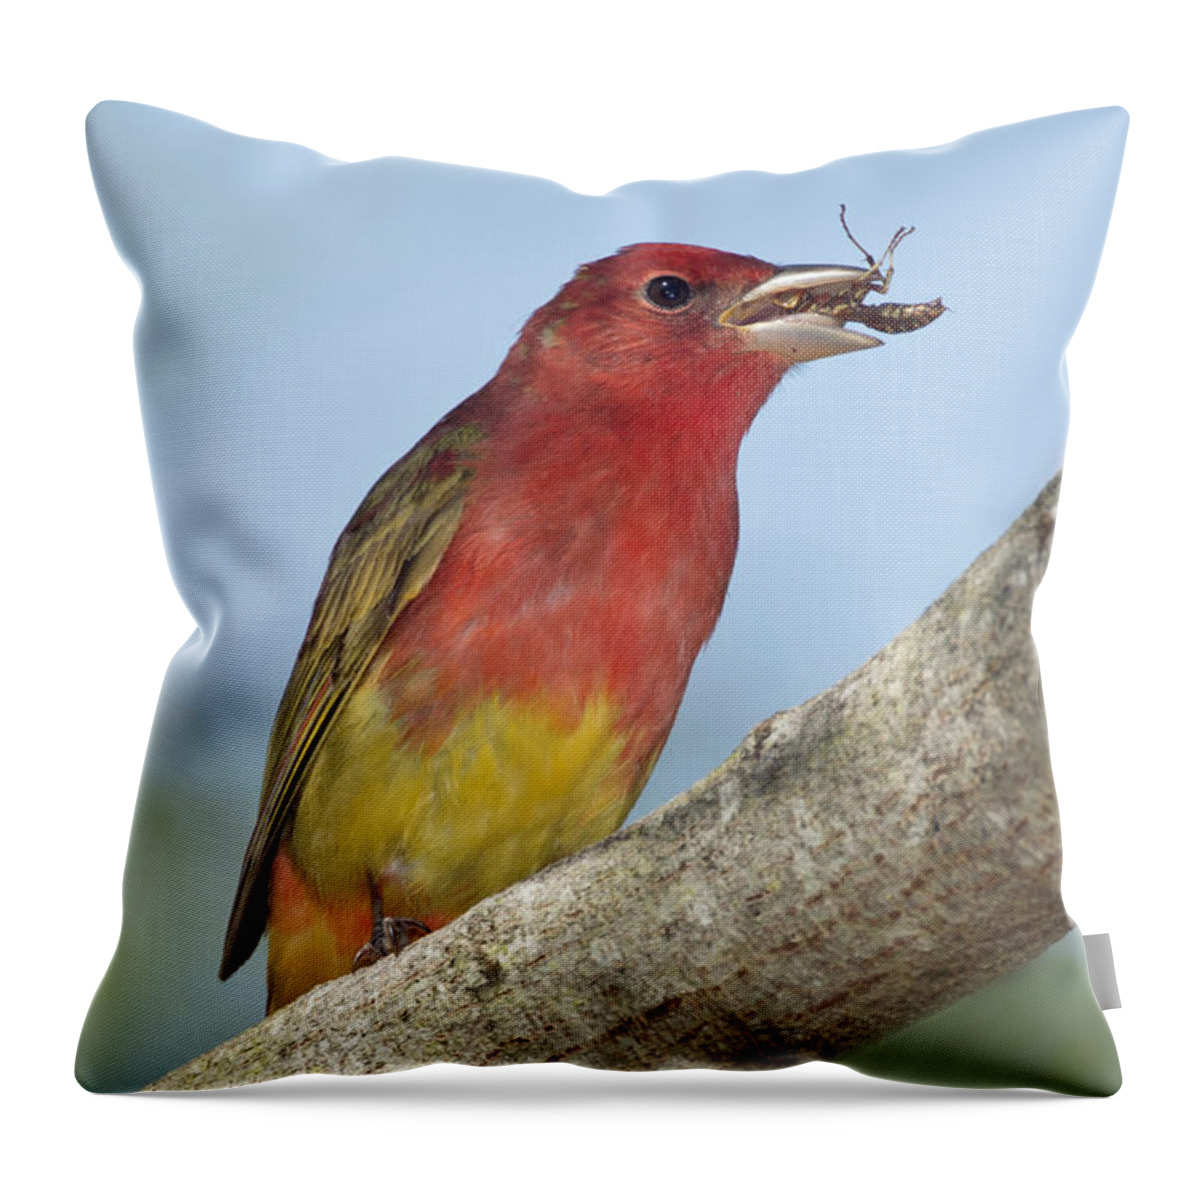 Summer Tanager Throw Pillow featuring the photograph Summer Tanager Eating Wasp by Anthony Mercieca